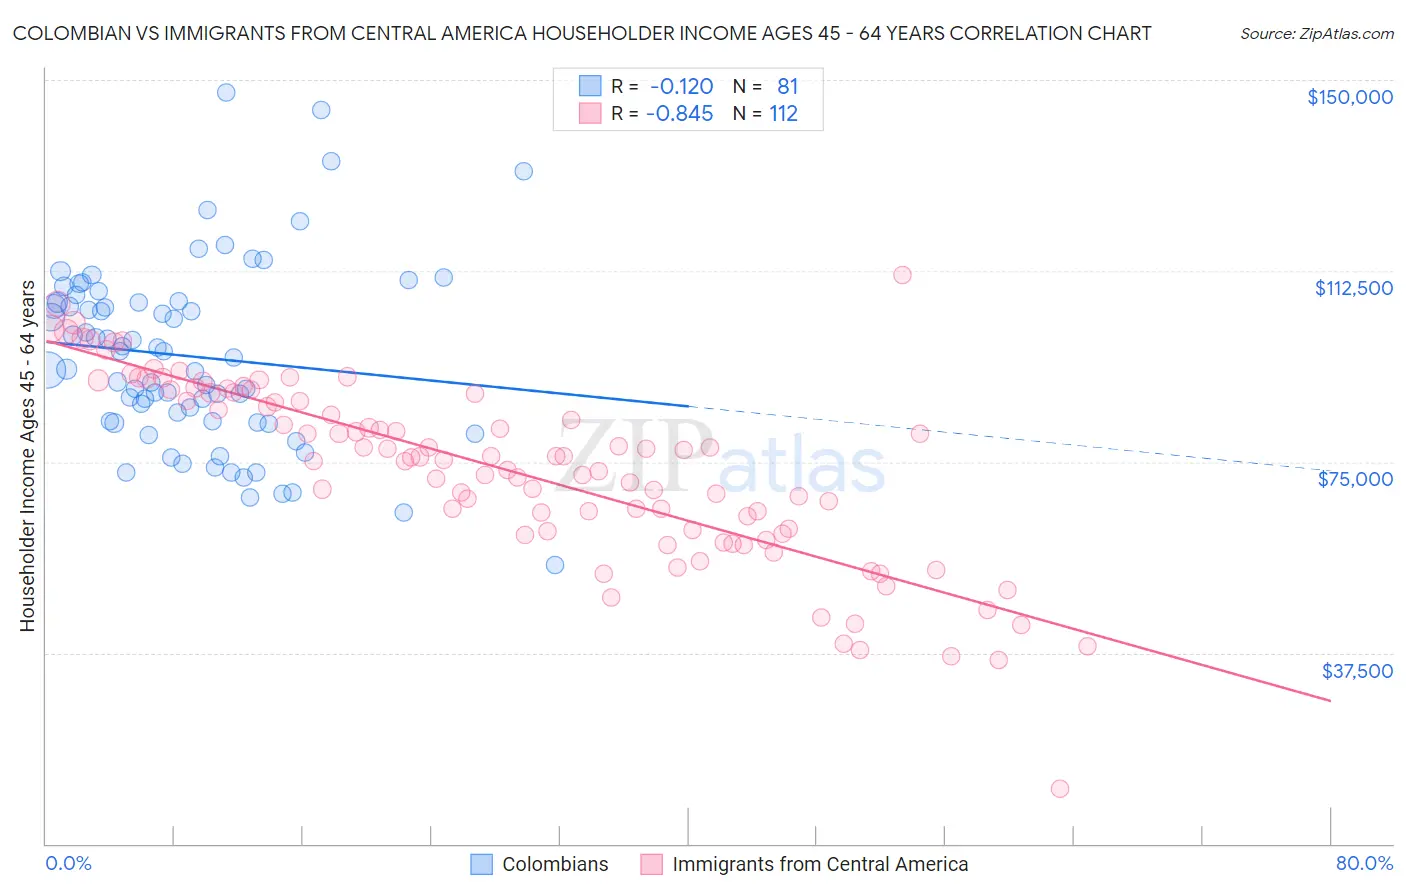 Colombian vs Immigrants from Central America Householder Income Ages 45 - 64 years